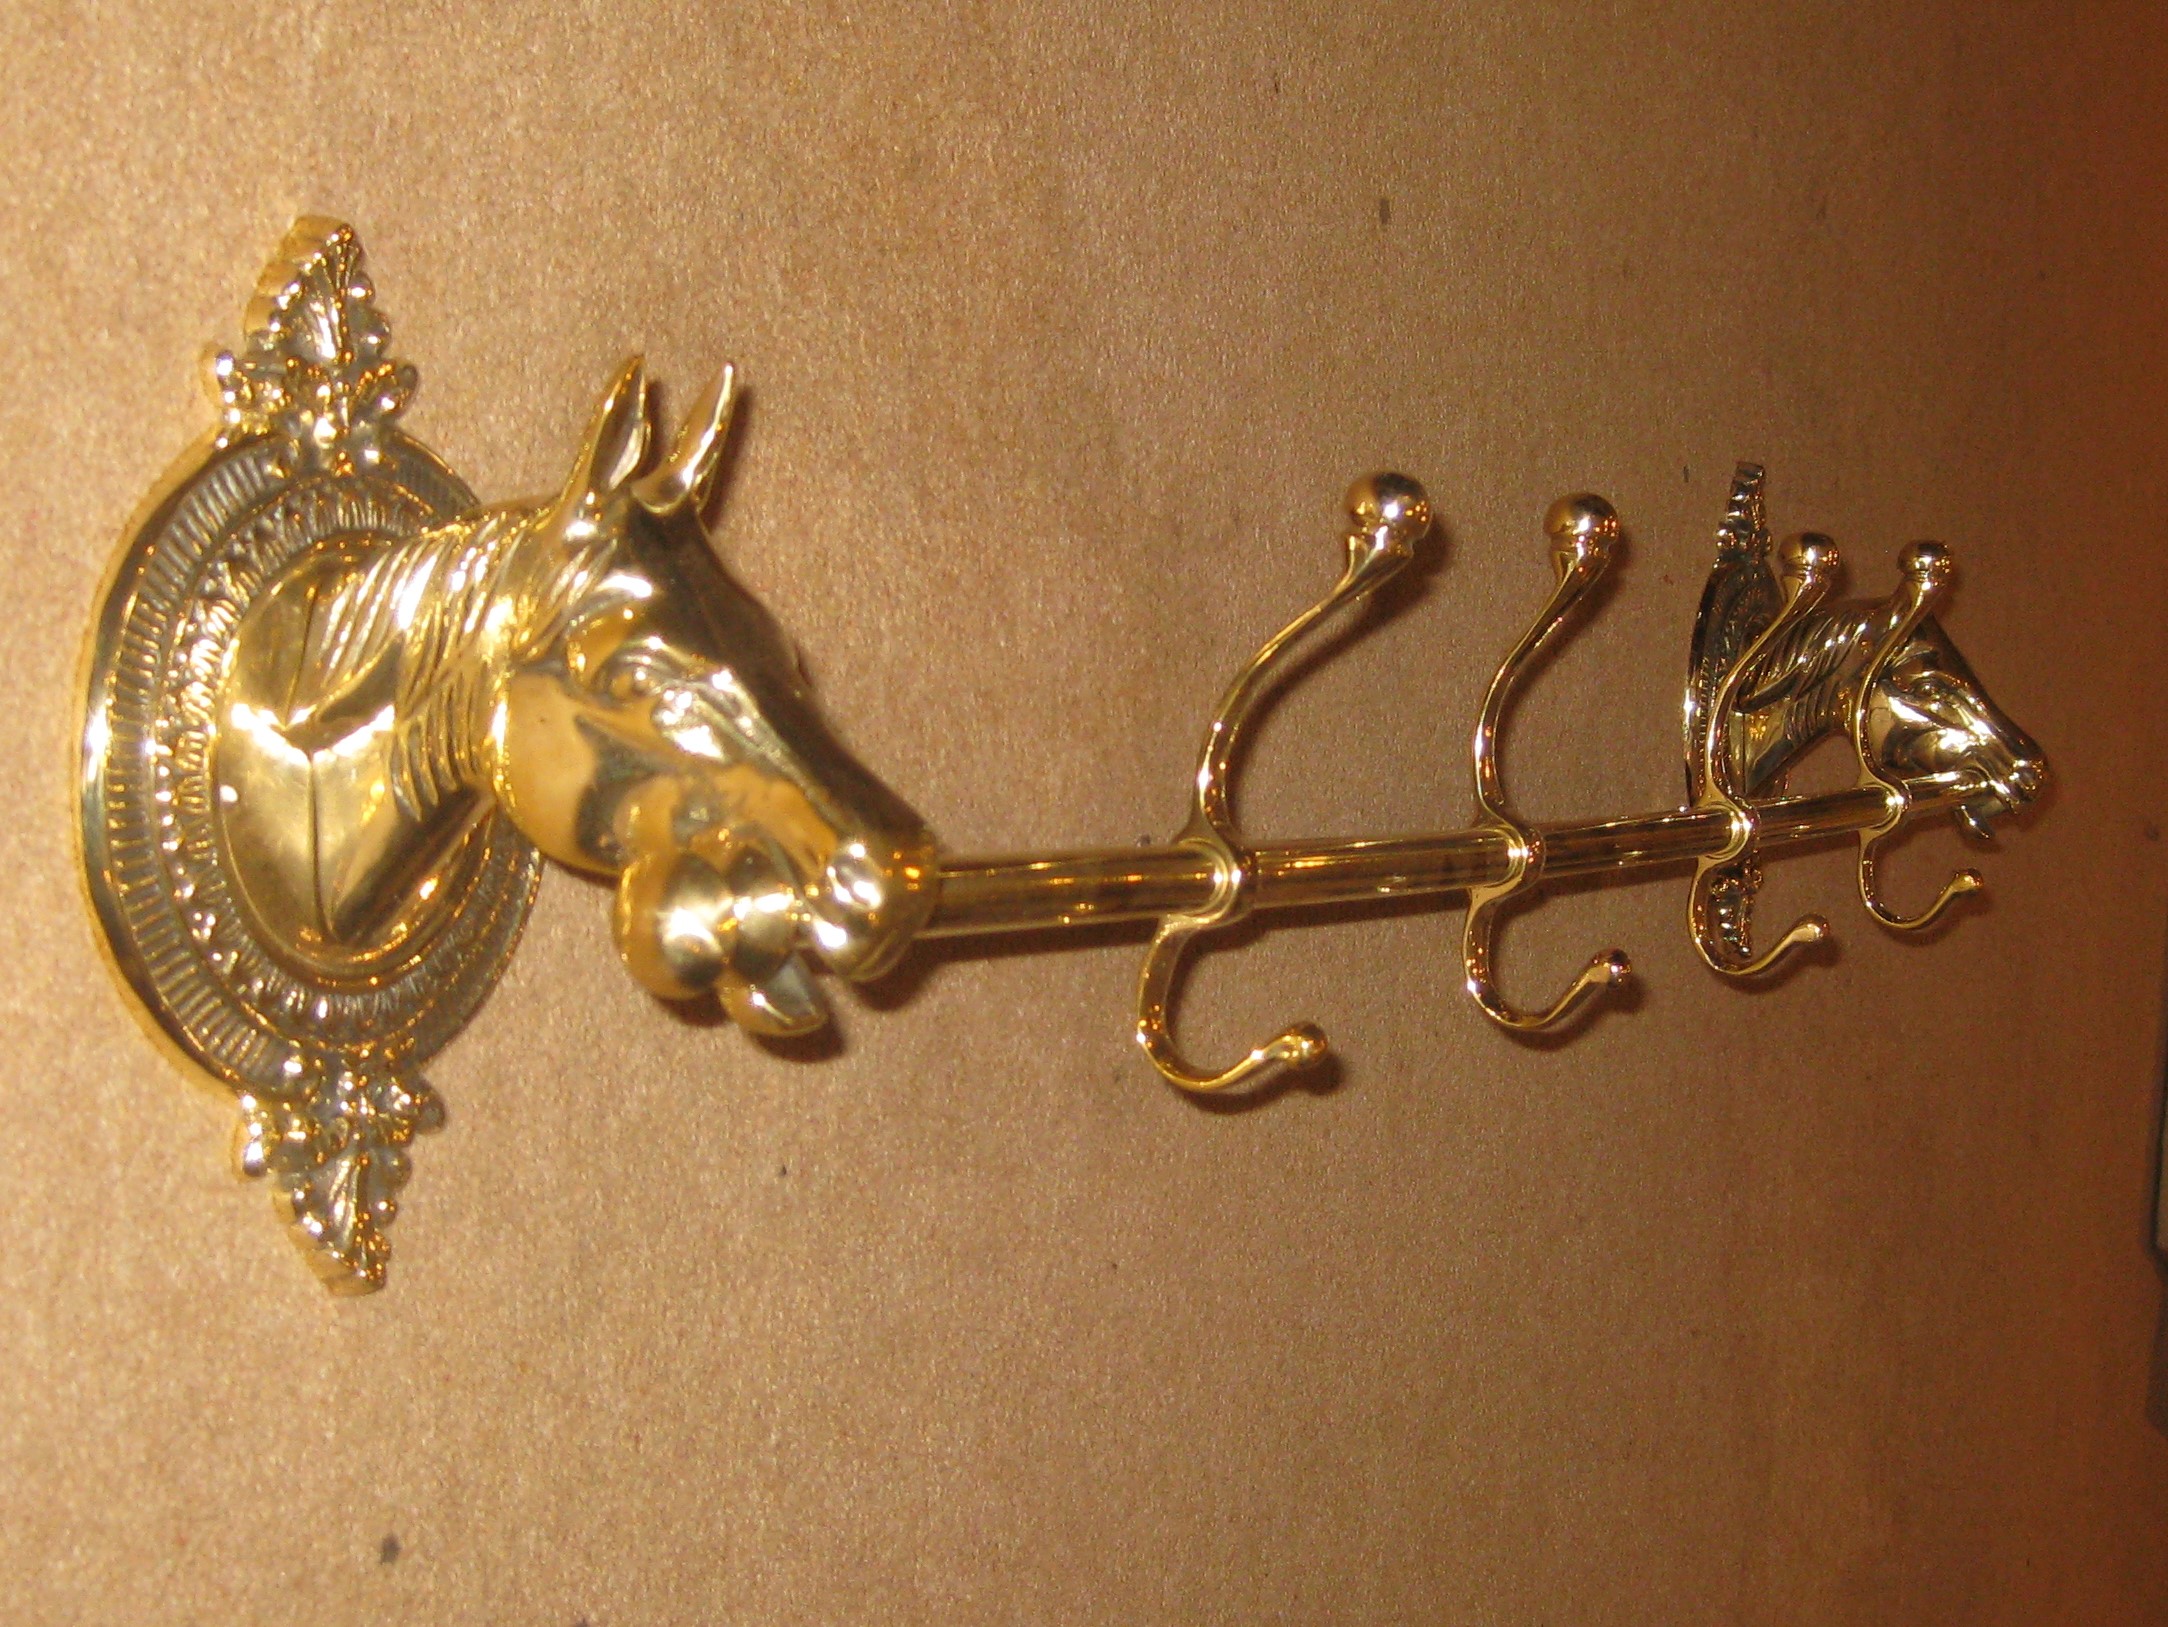 An unusual Circa 1910 'Horse' themed set of brass hat and coat hooks